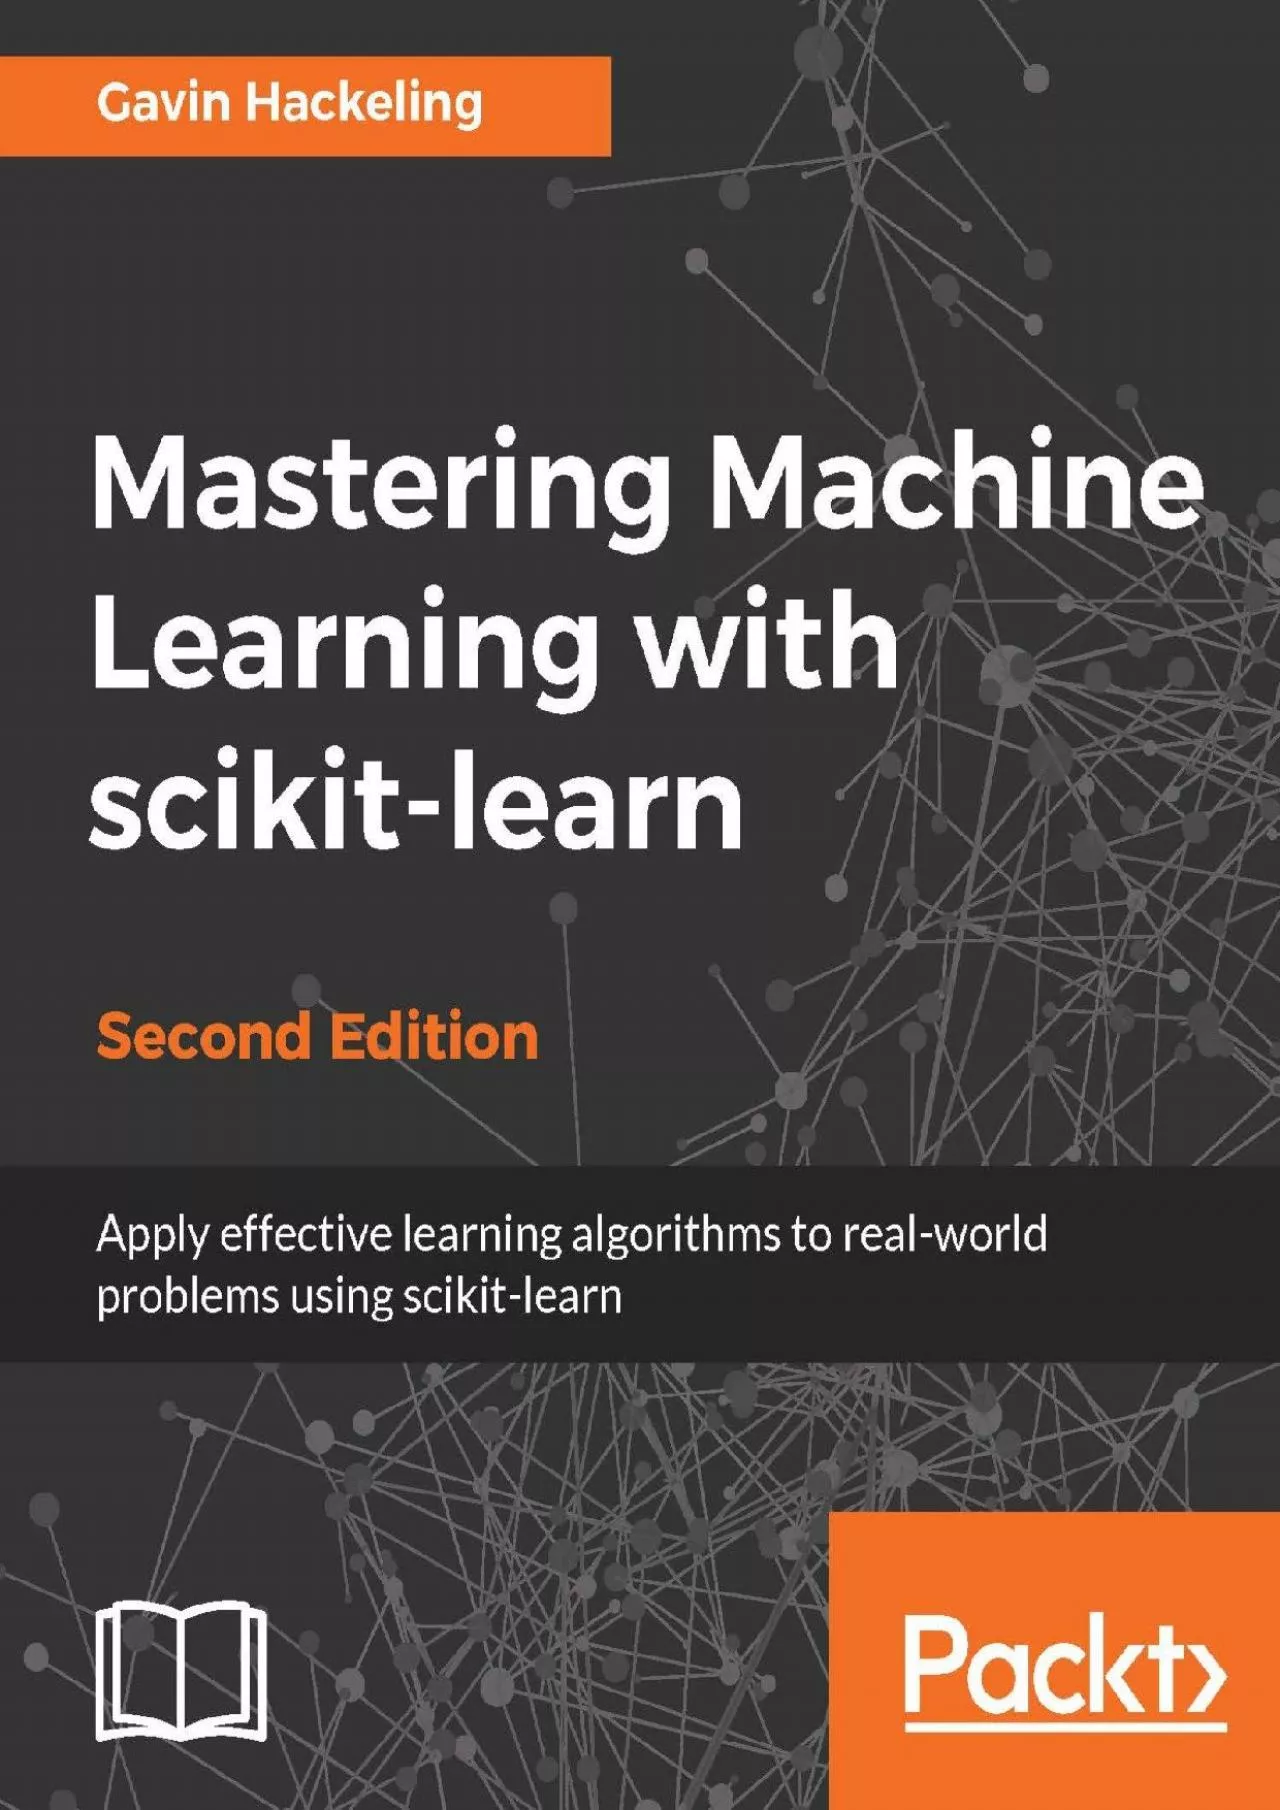 [DOWLOAD]-Mastering Machine Learning with scikit-learn - Second Edition: Apply effective